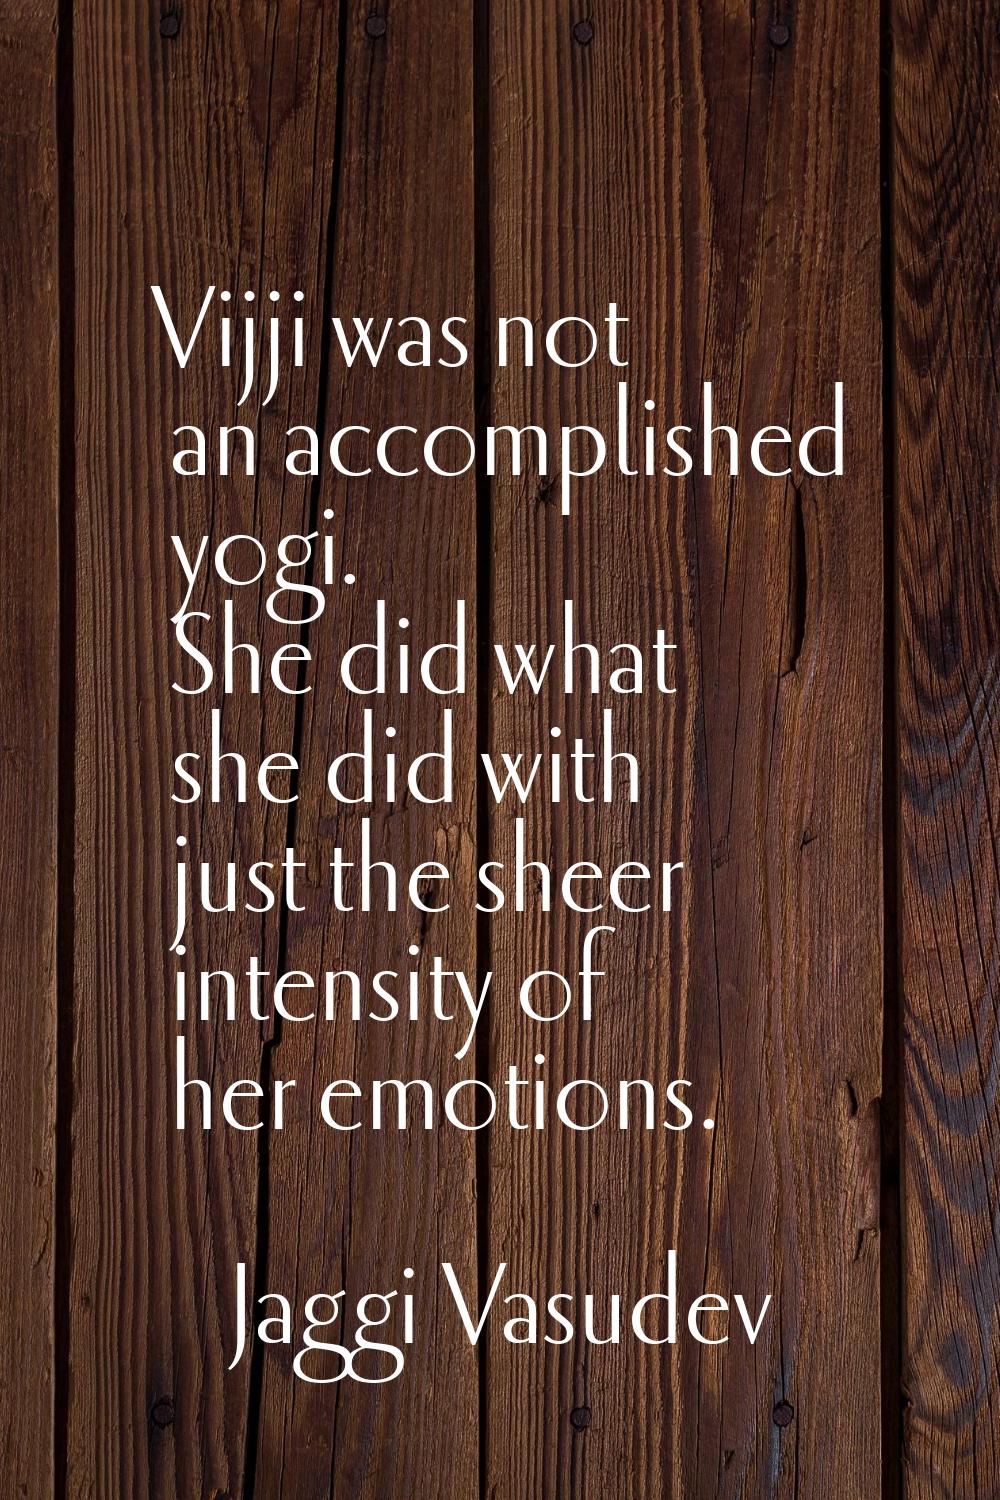 Vijji was not an accomplished yogi. She did what she did with just the sheer intensity of her emoti